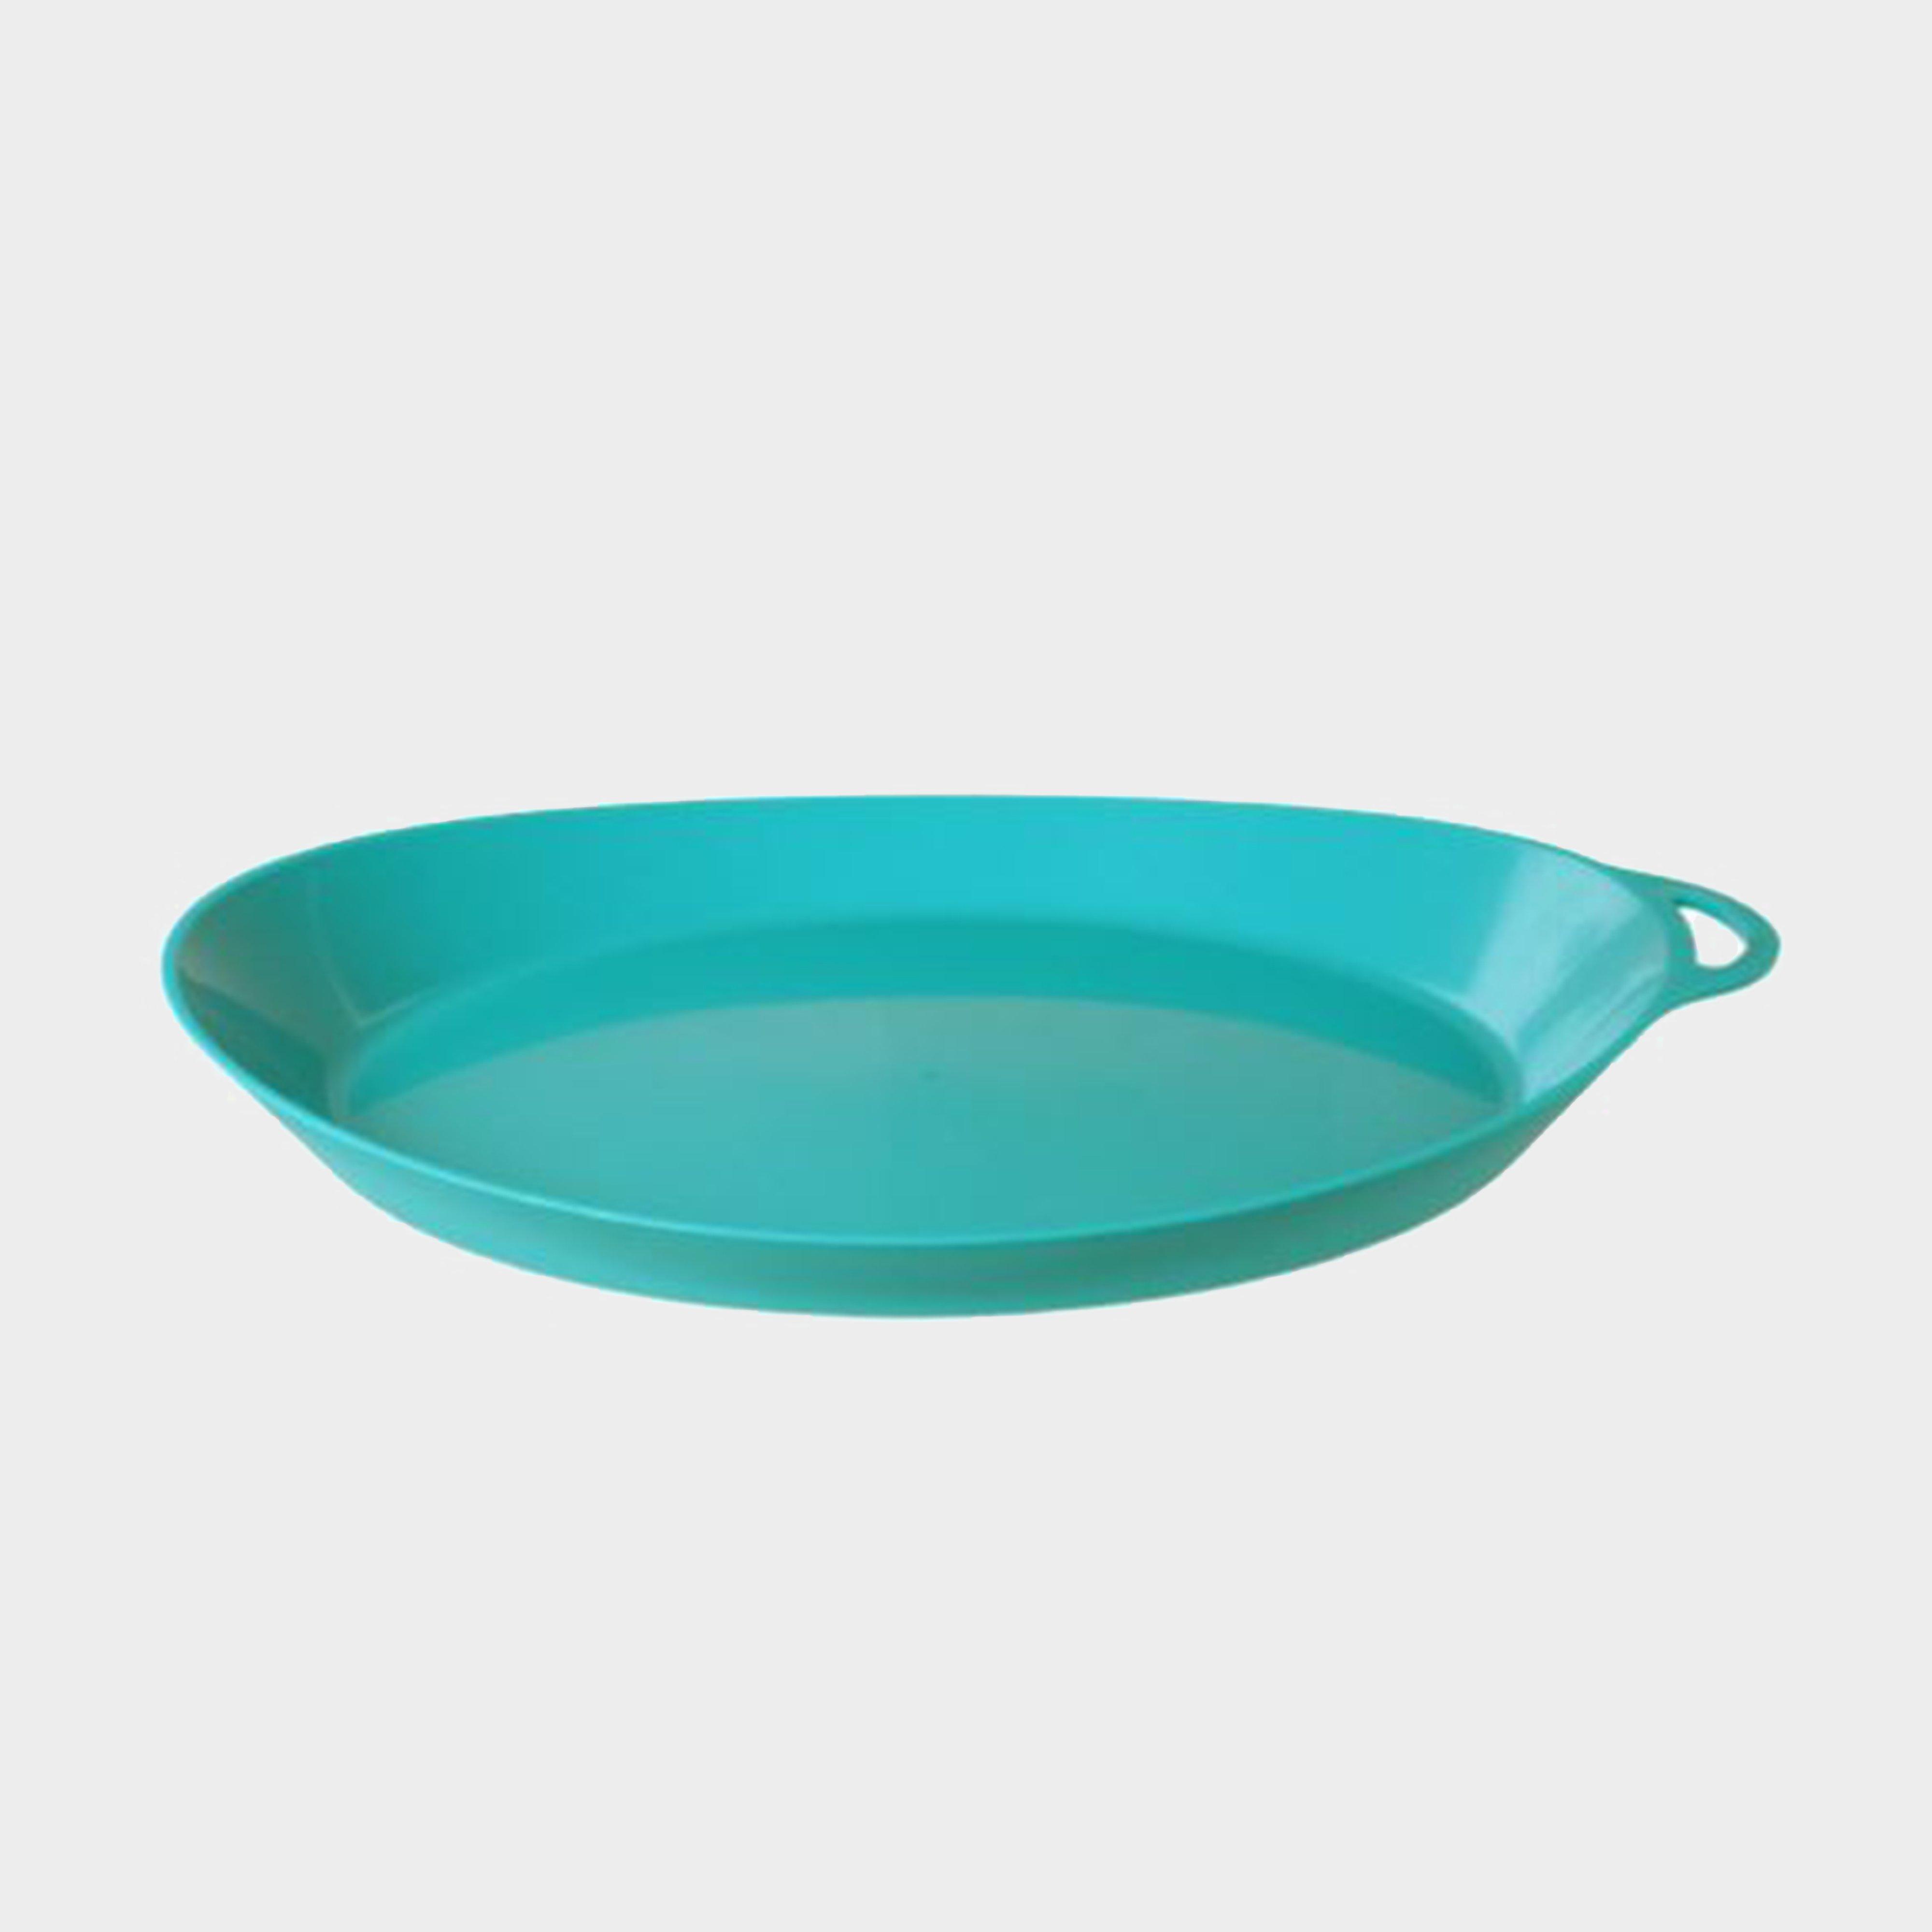 Photos - Other Camping Utensils Lifeventure Ellipse Plastic Camping Plate, Blue 